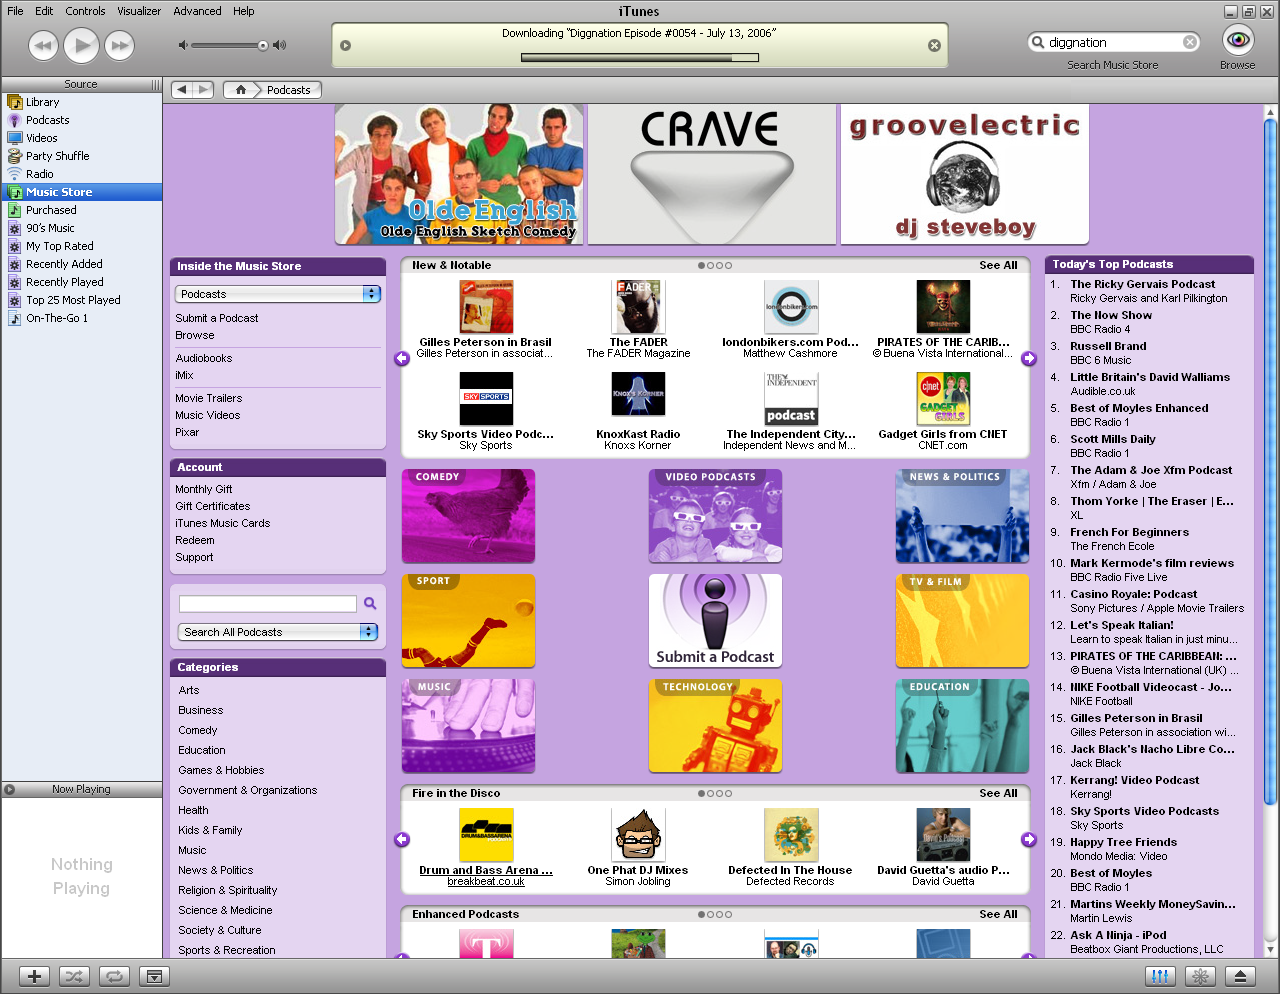 One Phat DJ on iTunes Podcast homepage